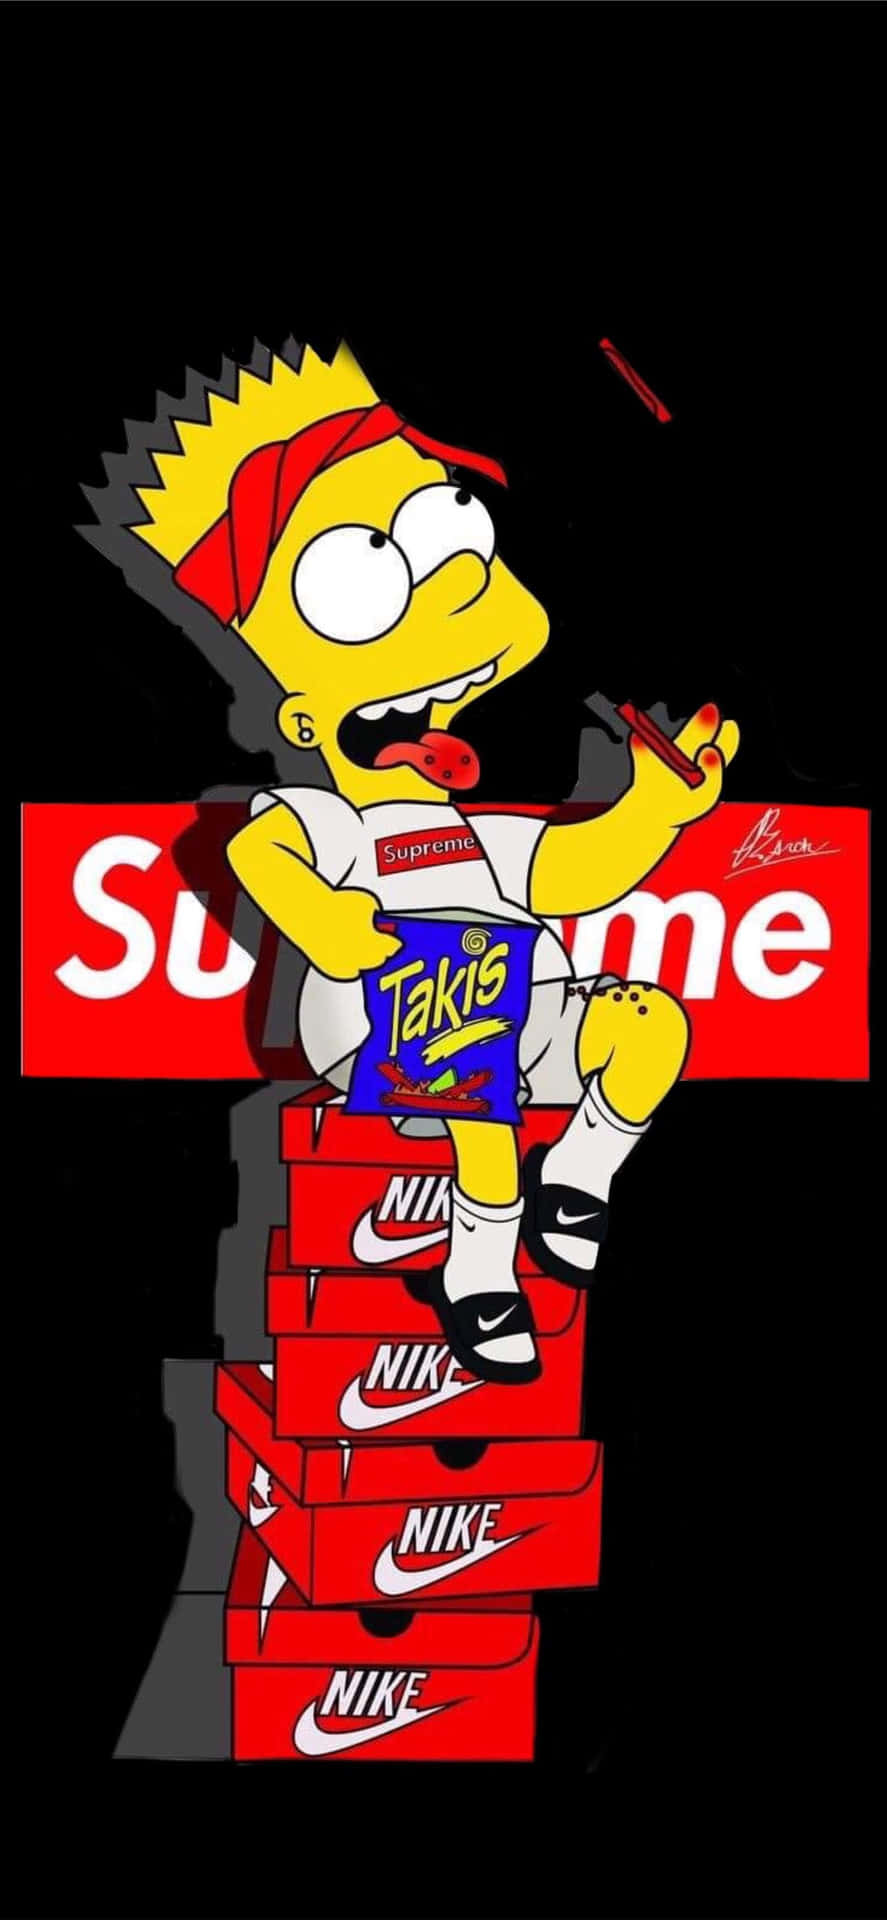 Look cool and stylish with the limited edition Cool Bart Simpson Supreme! Wallpaper